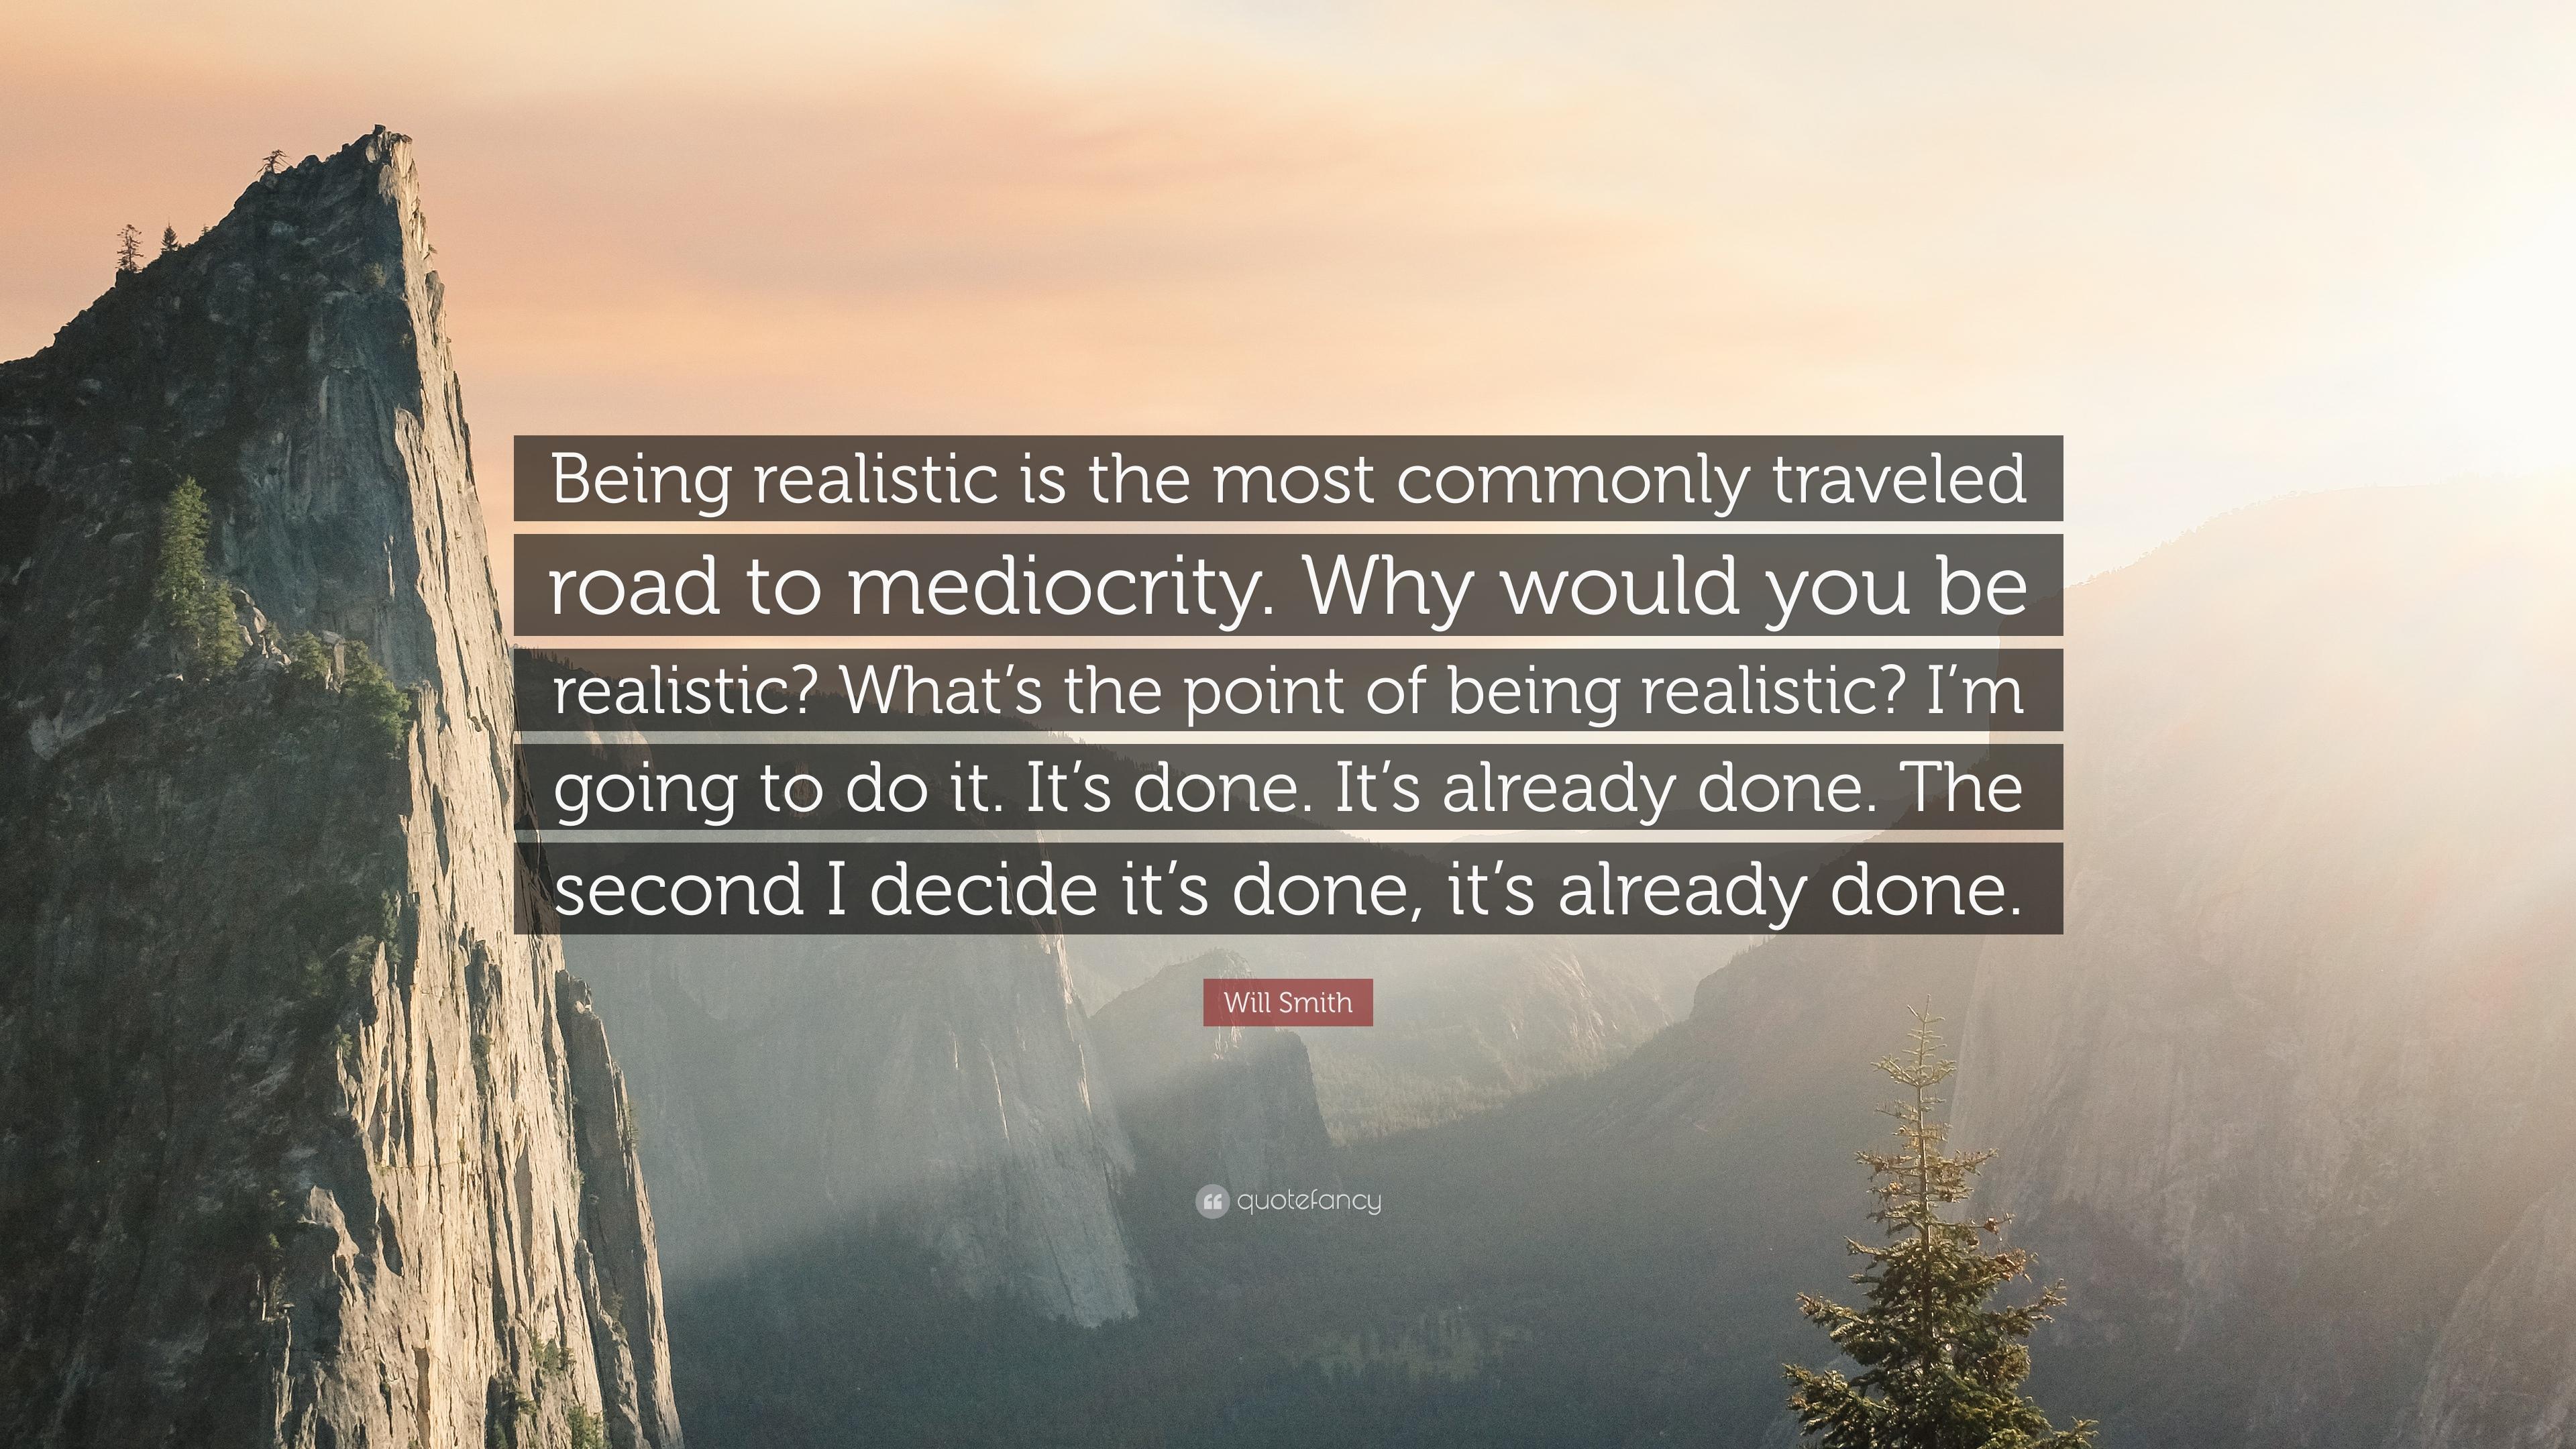 Will Smith Quote: “Being realistic is the most commonly